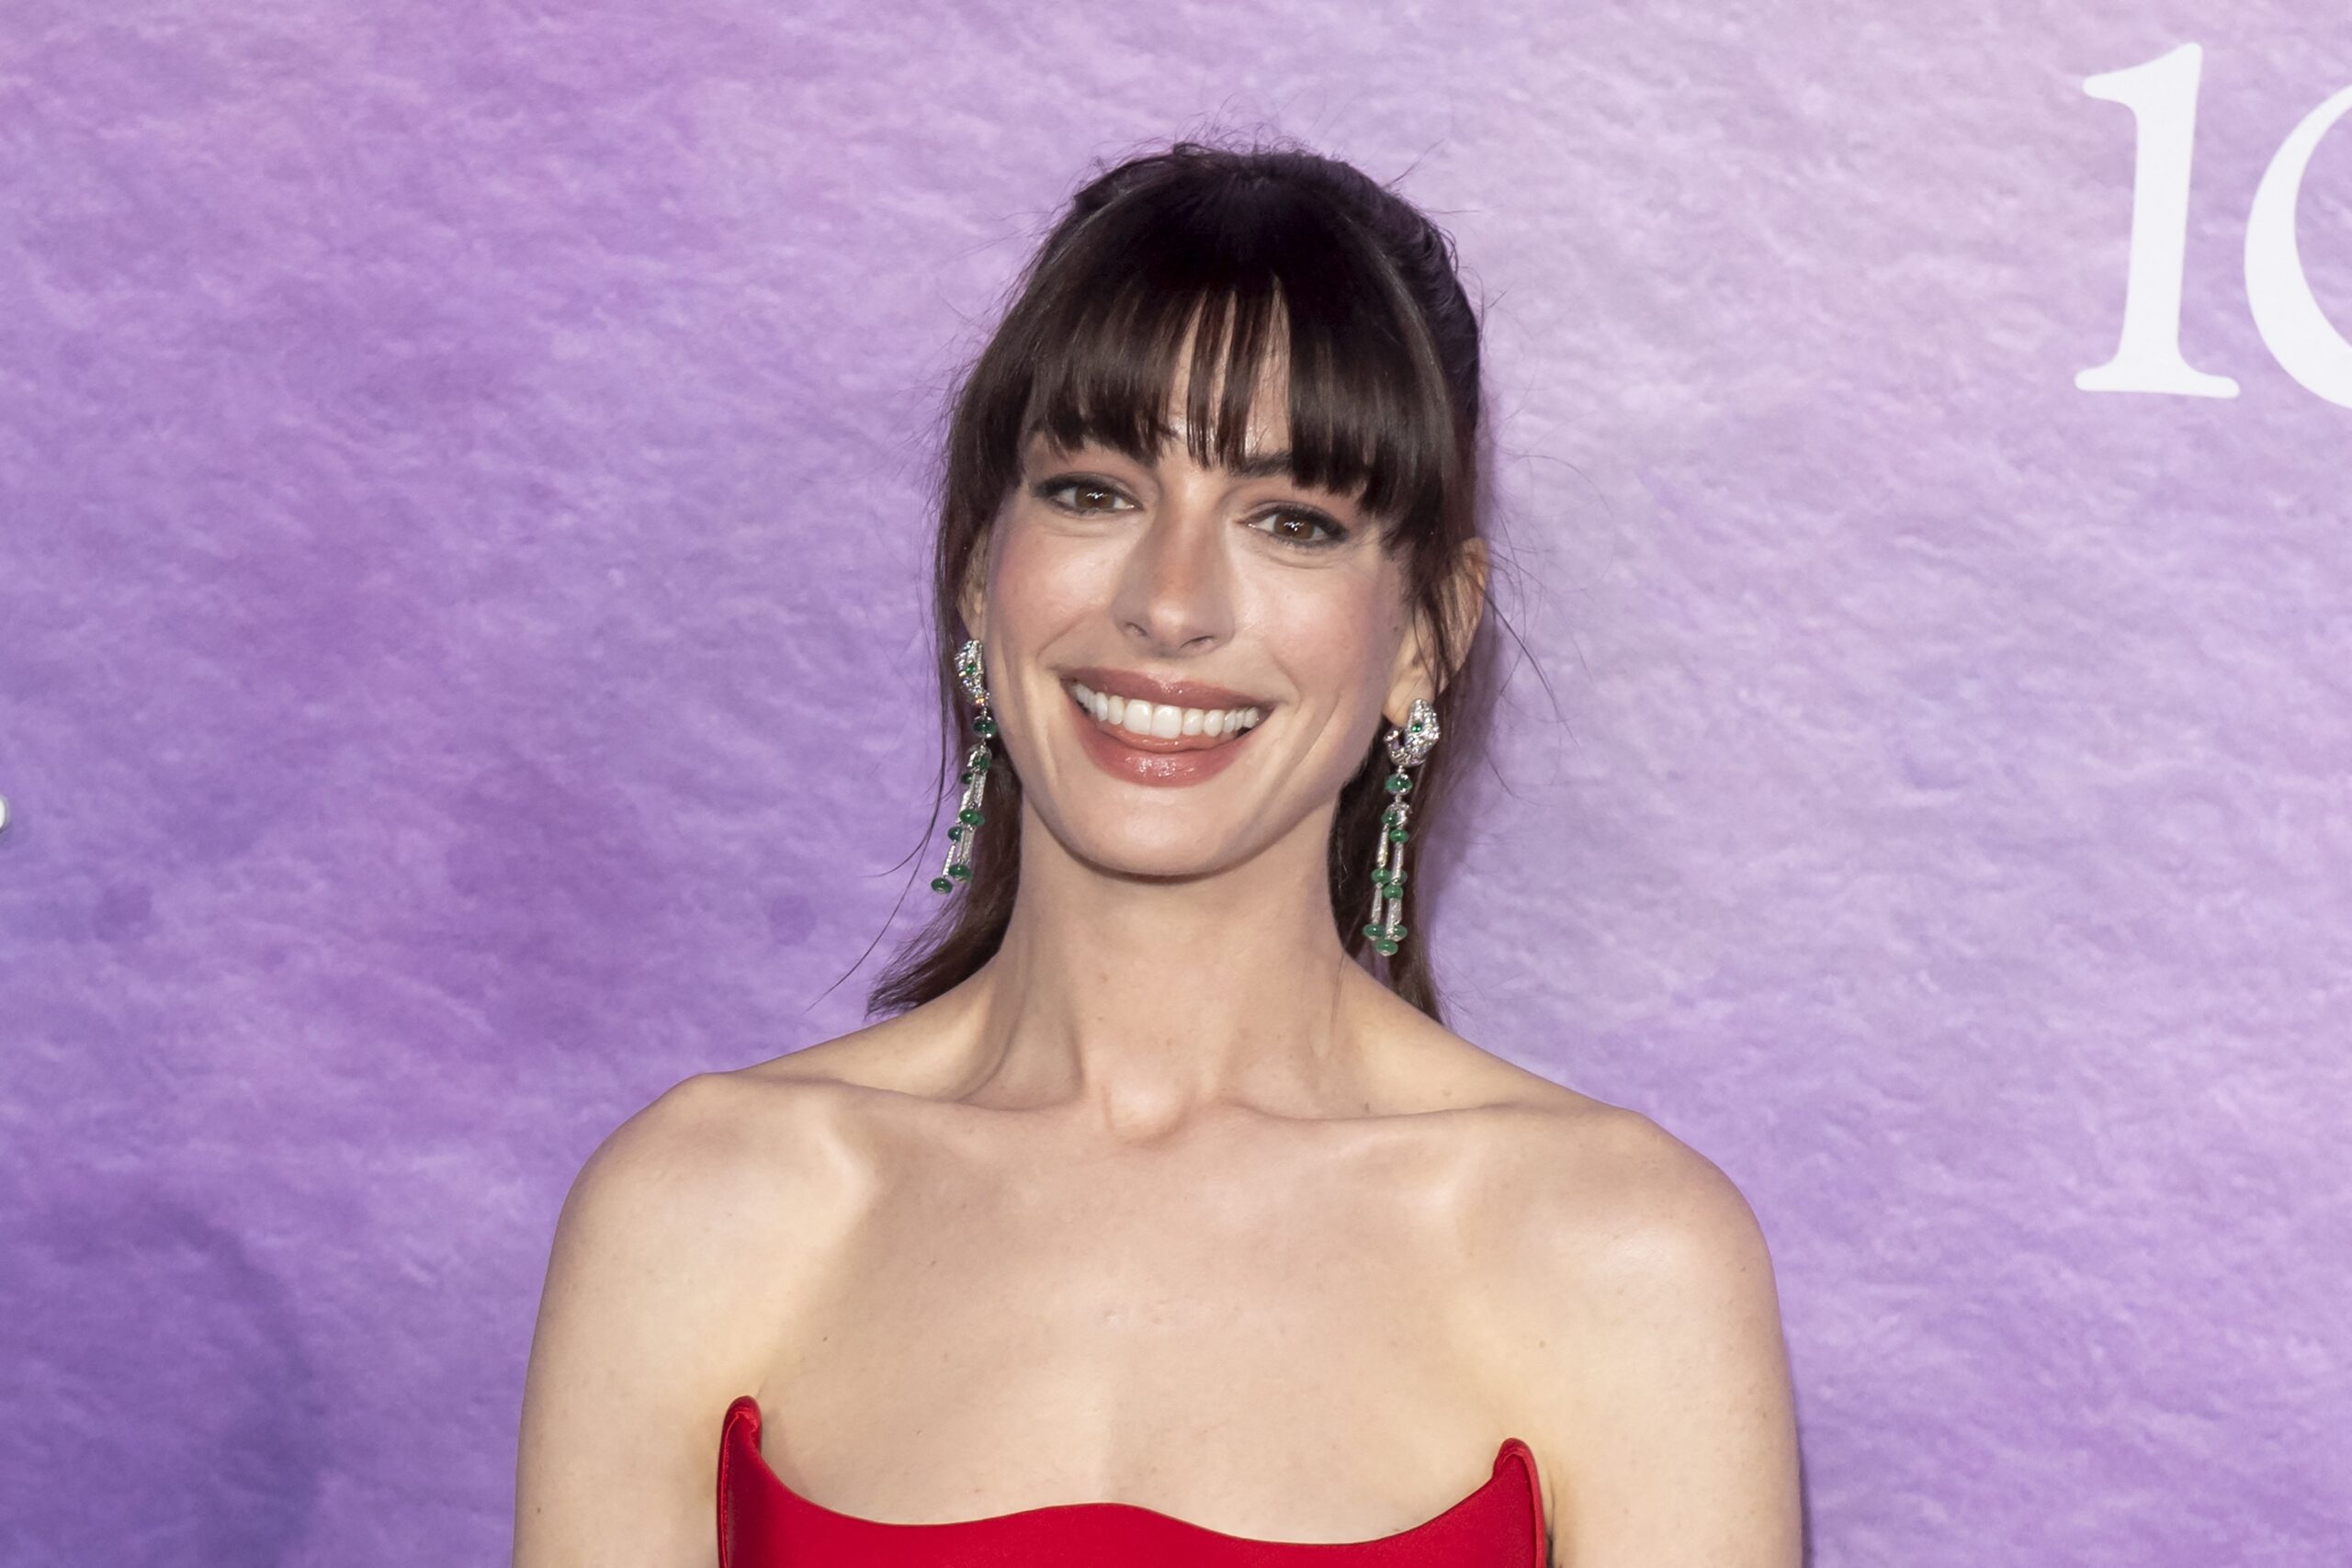 Prime Video's "The Idea Of You" New York Premiere.
29 Apr 2024
Pictured: NEW YORK, NEW YORK - APRIL 29: Anne Hathaway attends the Prime Video's "The Idea Of You" New York premiere at Jazz at Lincoln Center on April 29, 2024 in New York City.,Image: 869058118, License: Rights-managed, Restrictions: World Rights, Model Release: no, Credit line: Ron Adar / M10s / MEGA / The Mega Agency / Profimedia